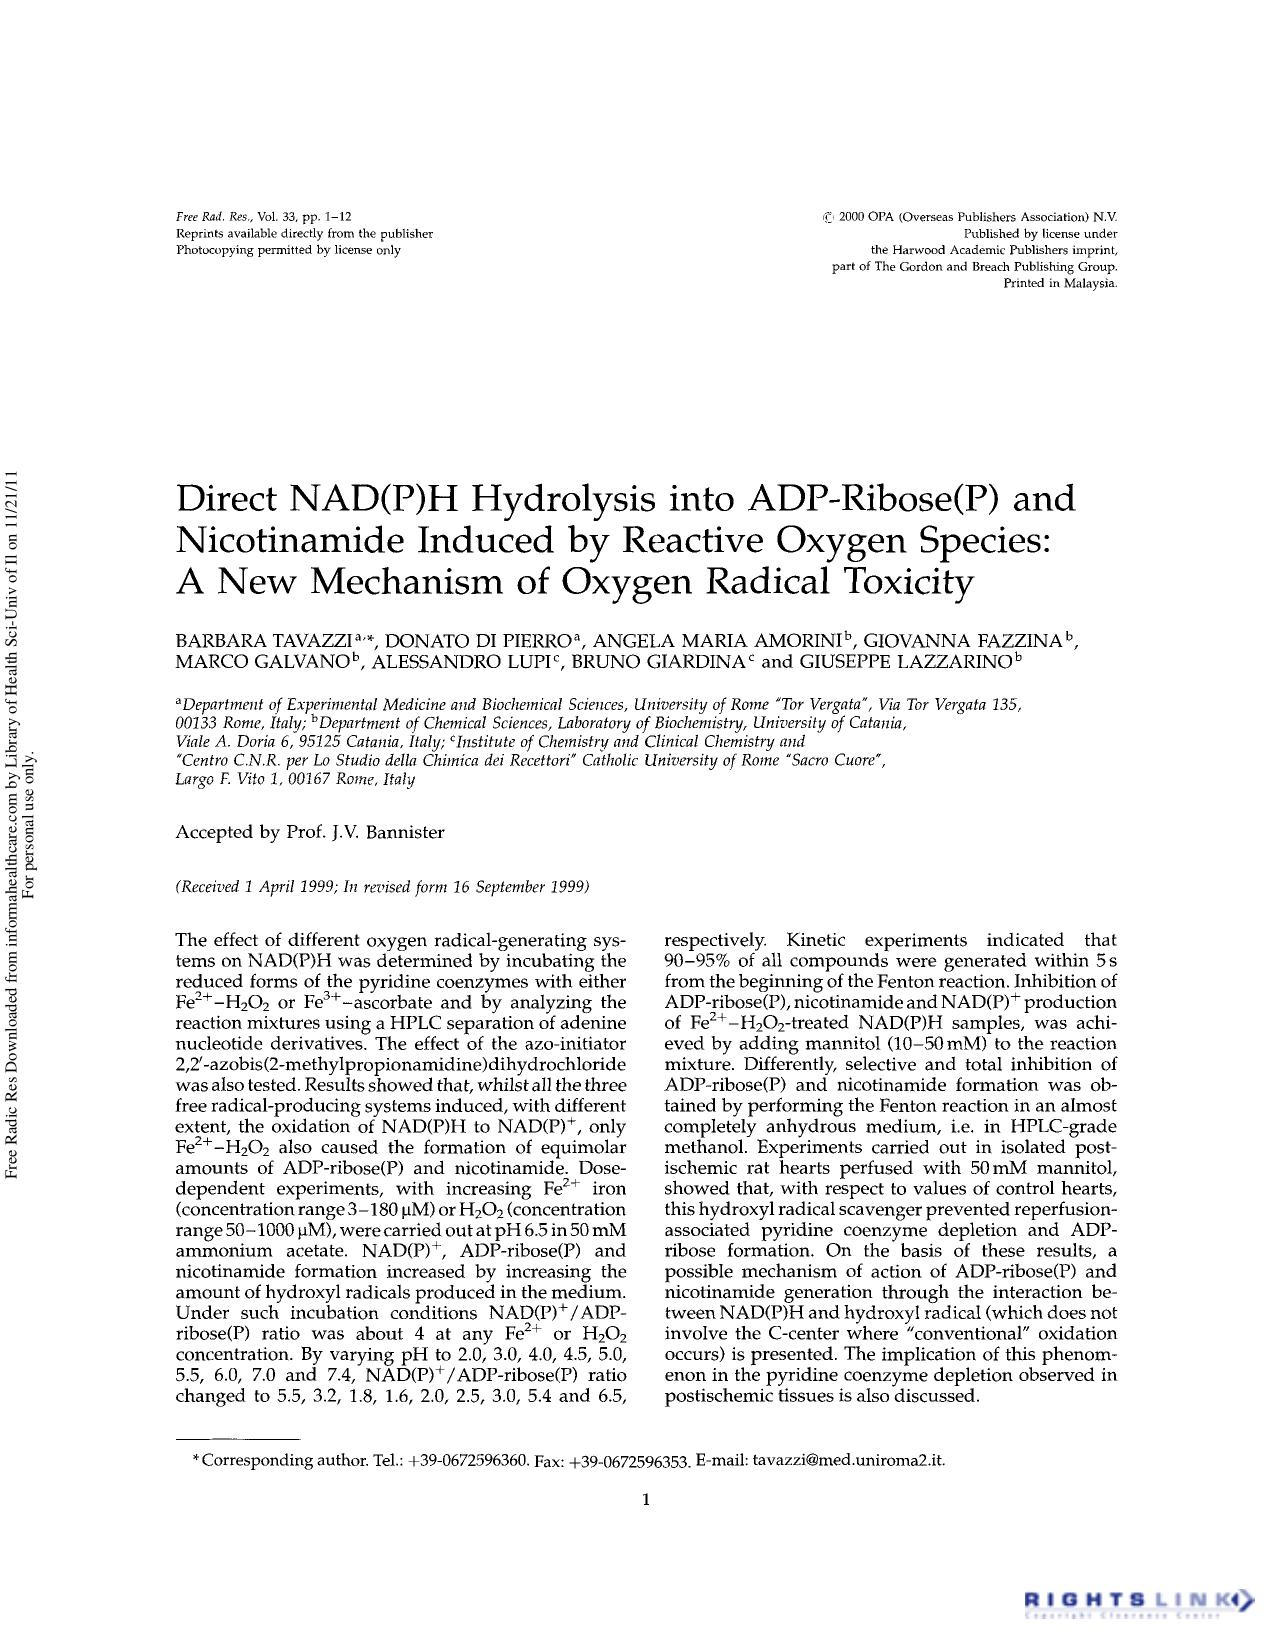 Direct NAD(P)H hydrolysis into ADP-ribose(P) and nicotinamide induced by reactive oxygen species: A new mechanism of oxygen radical toxicity by unknow